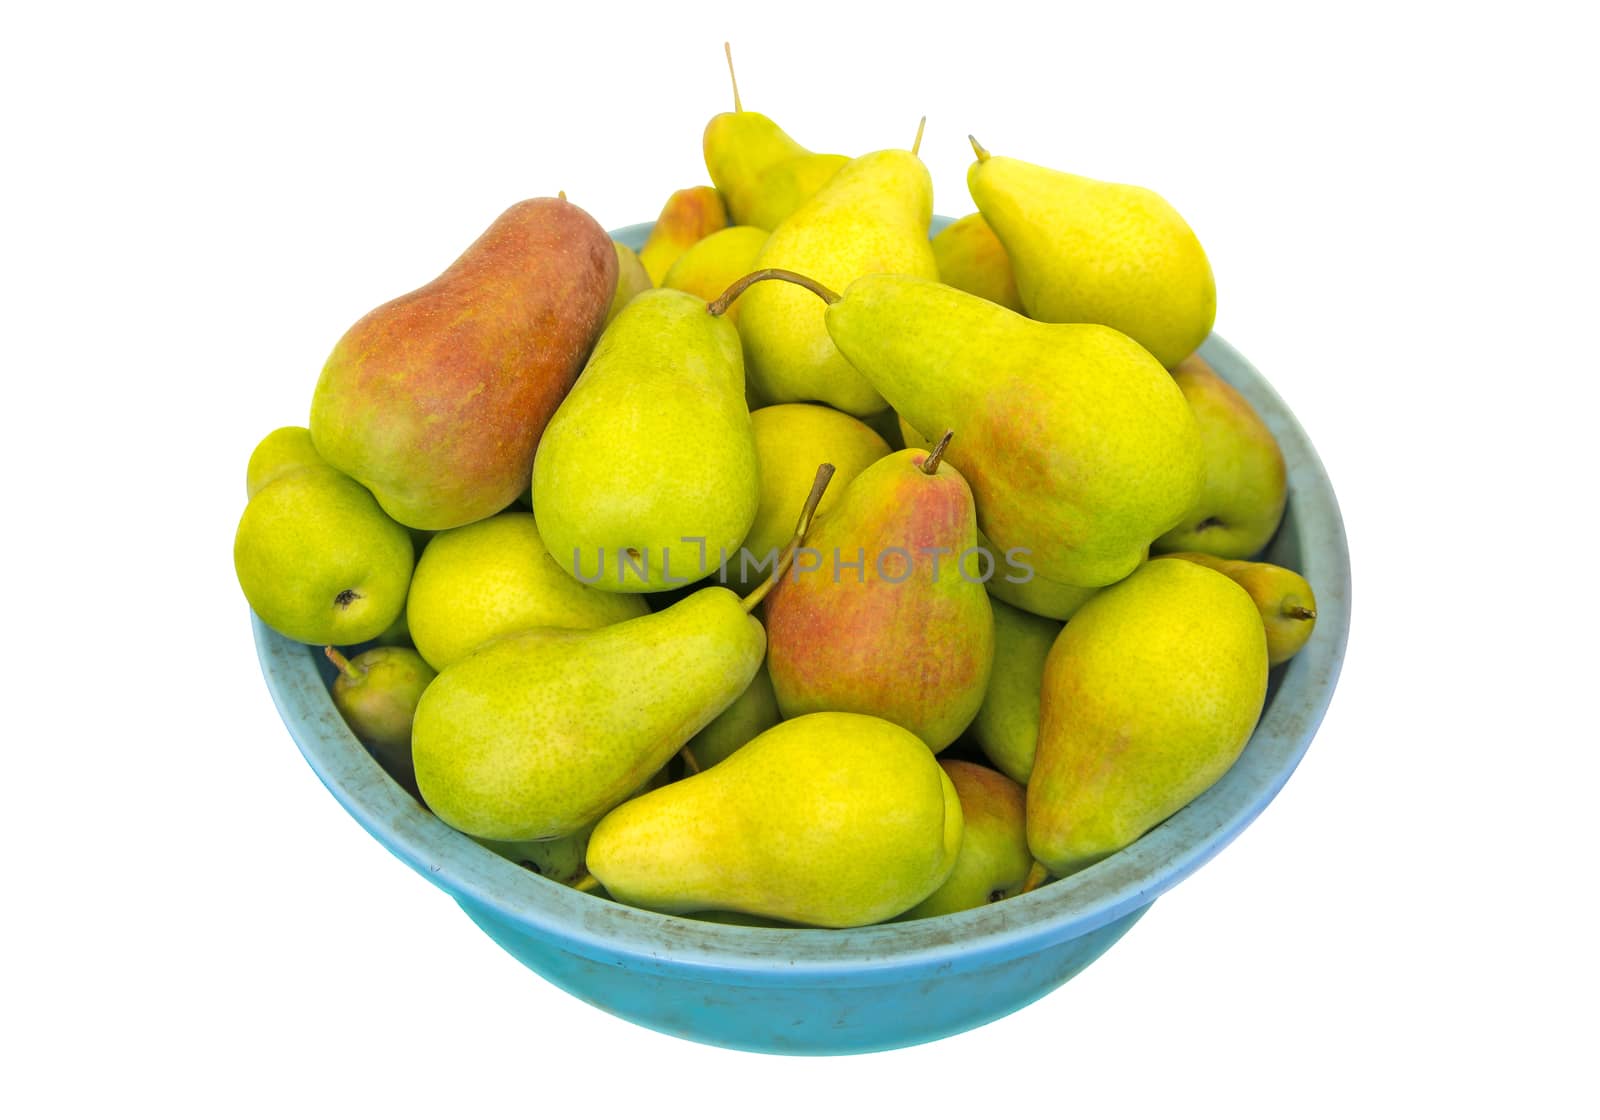 Heap of ripe sweet pears in the basket isolated on white. Clipping path included.